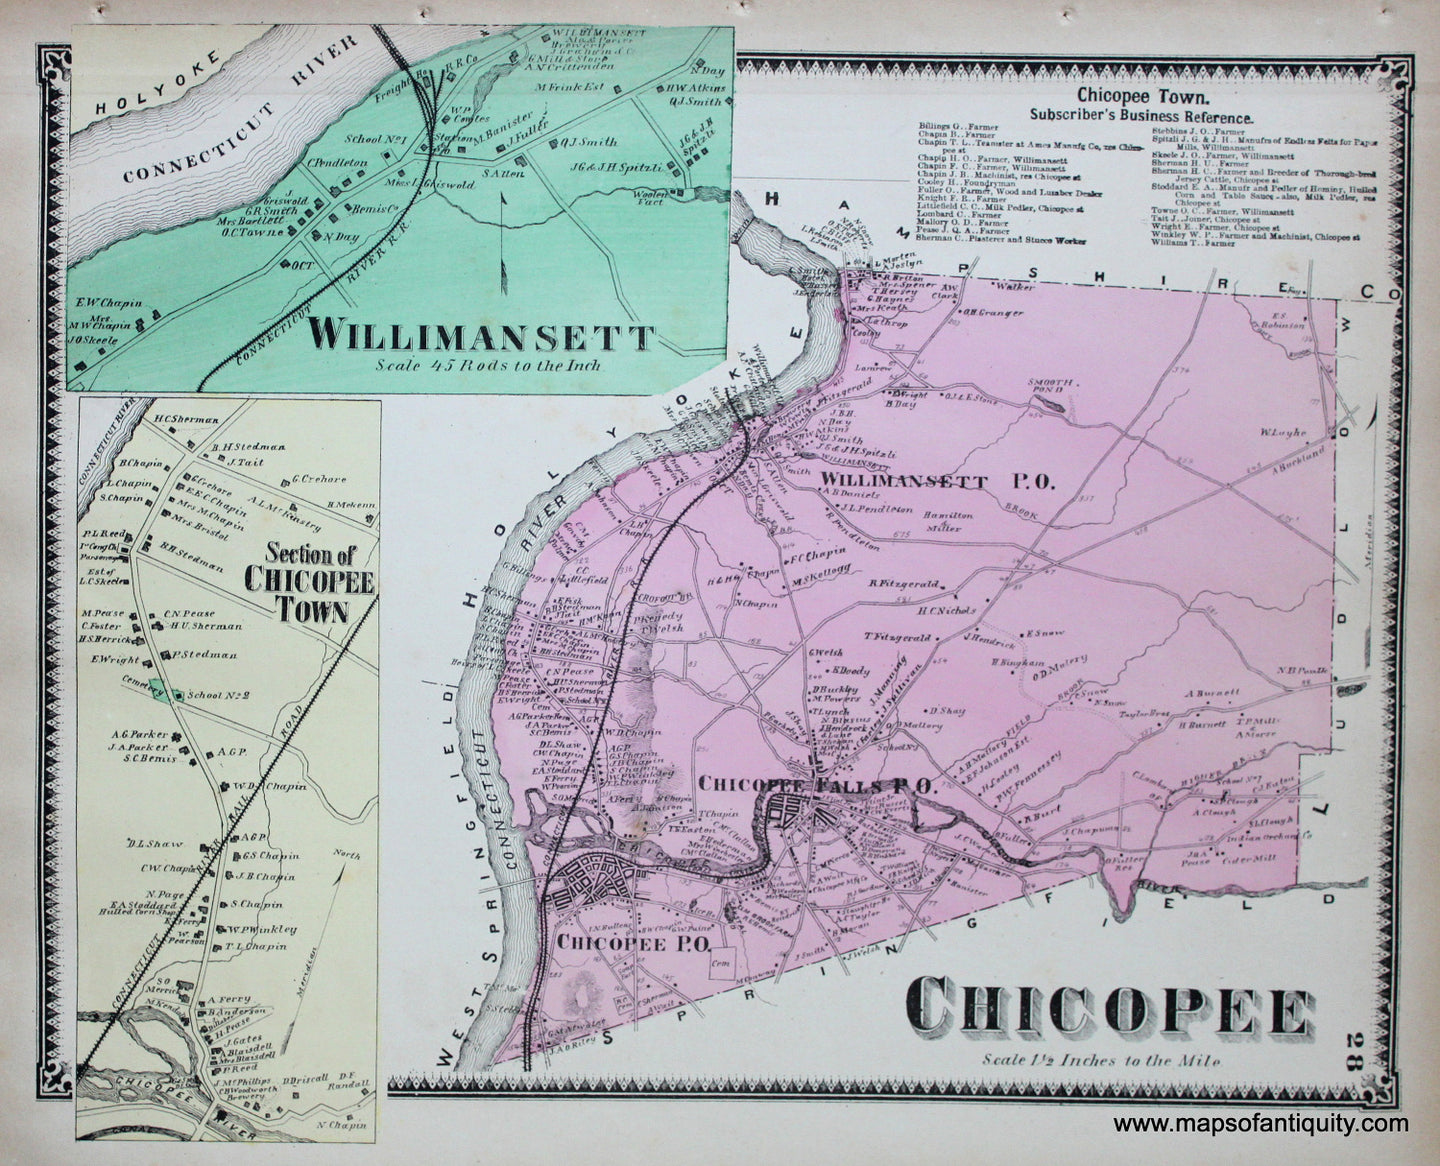 Antique-Hand-Colored-Map-Chicopee-Willimansett-p.-28-(MA)-Massachusetts-Hampden-County-1870-Beers-Ellis-and-Soule-Maps-Of-Antiquity